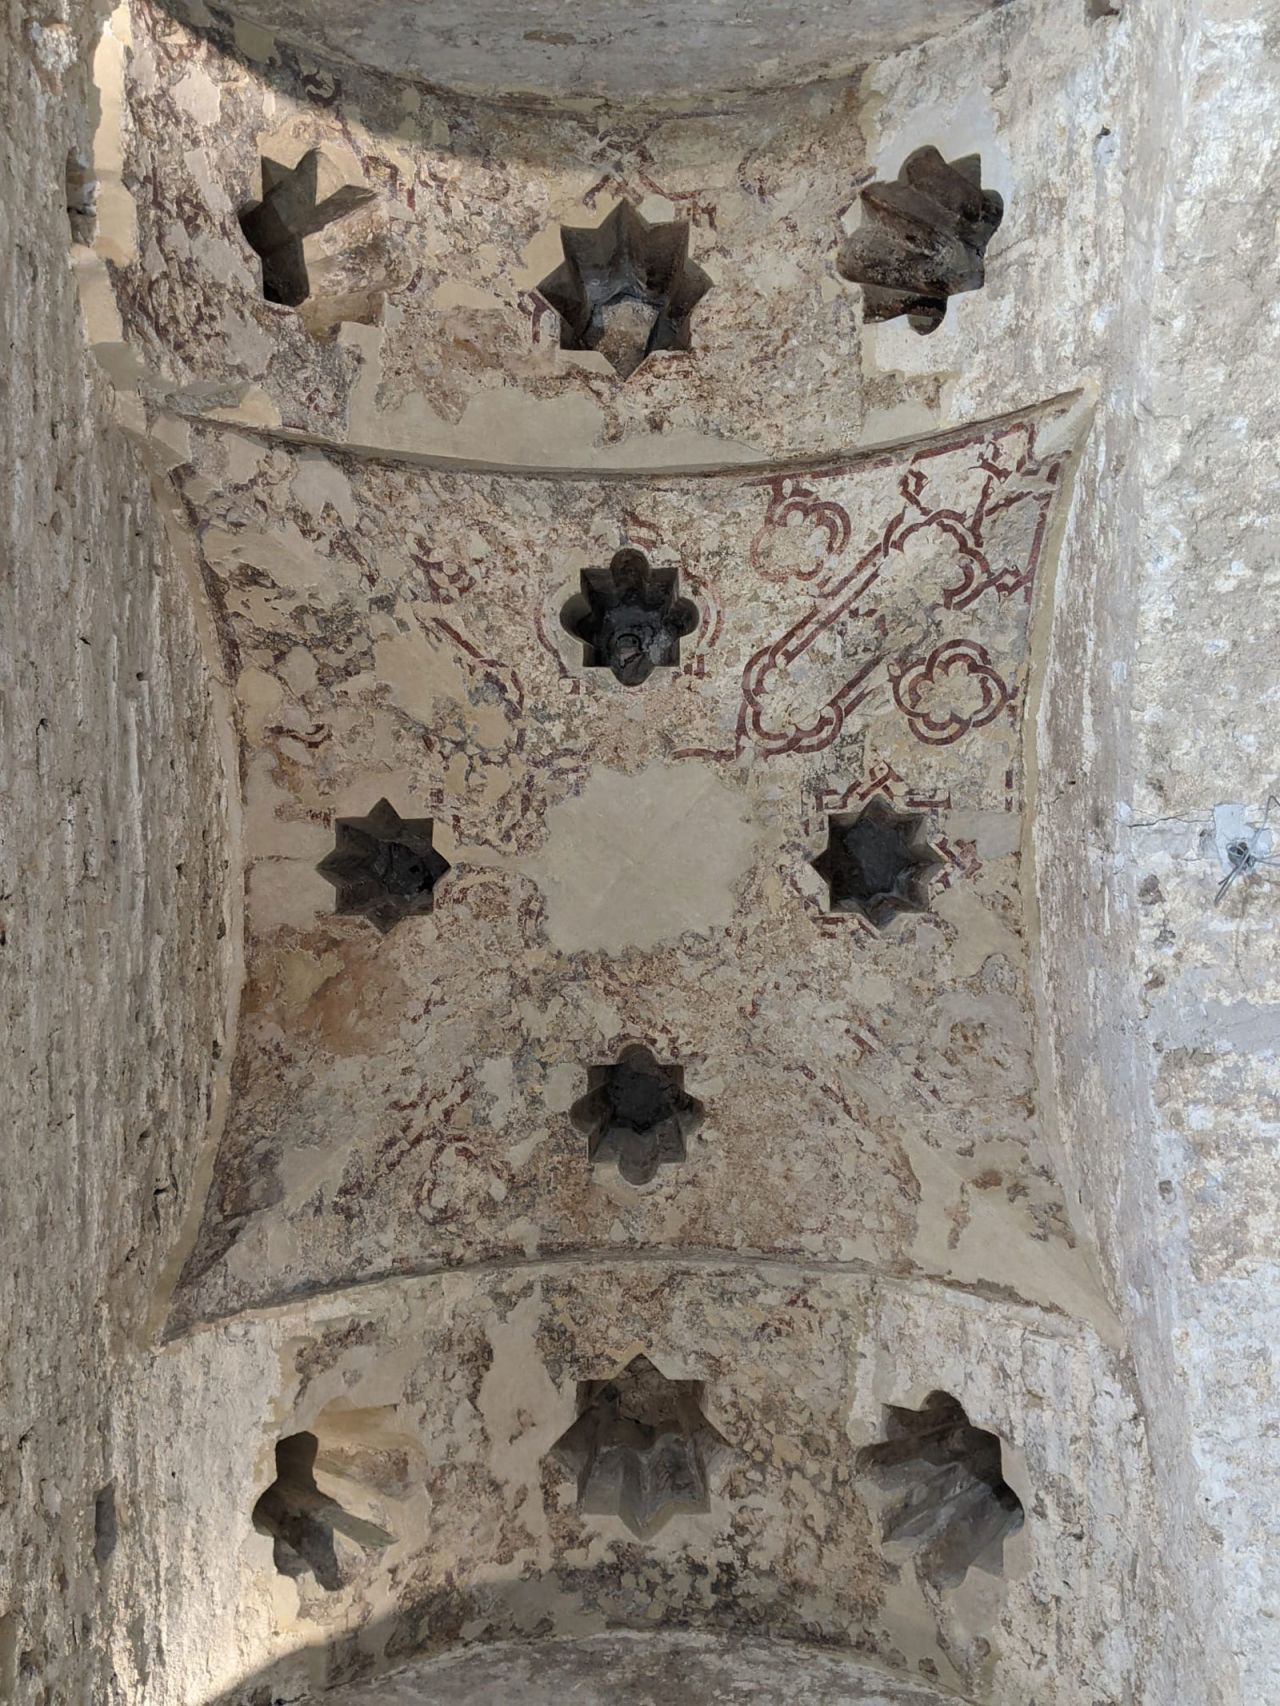 Star-shaped windows are typical of hammams.